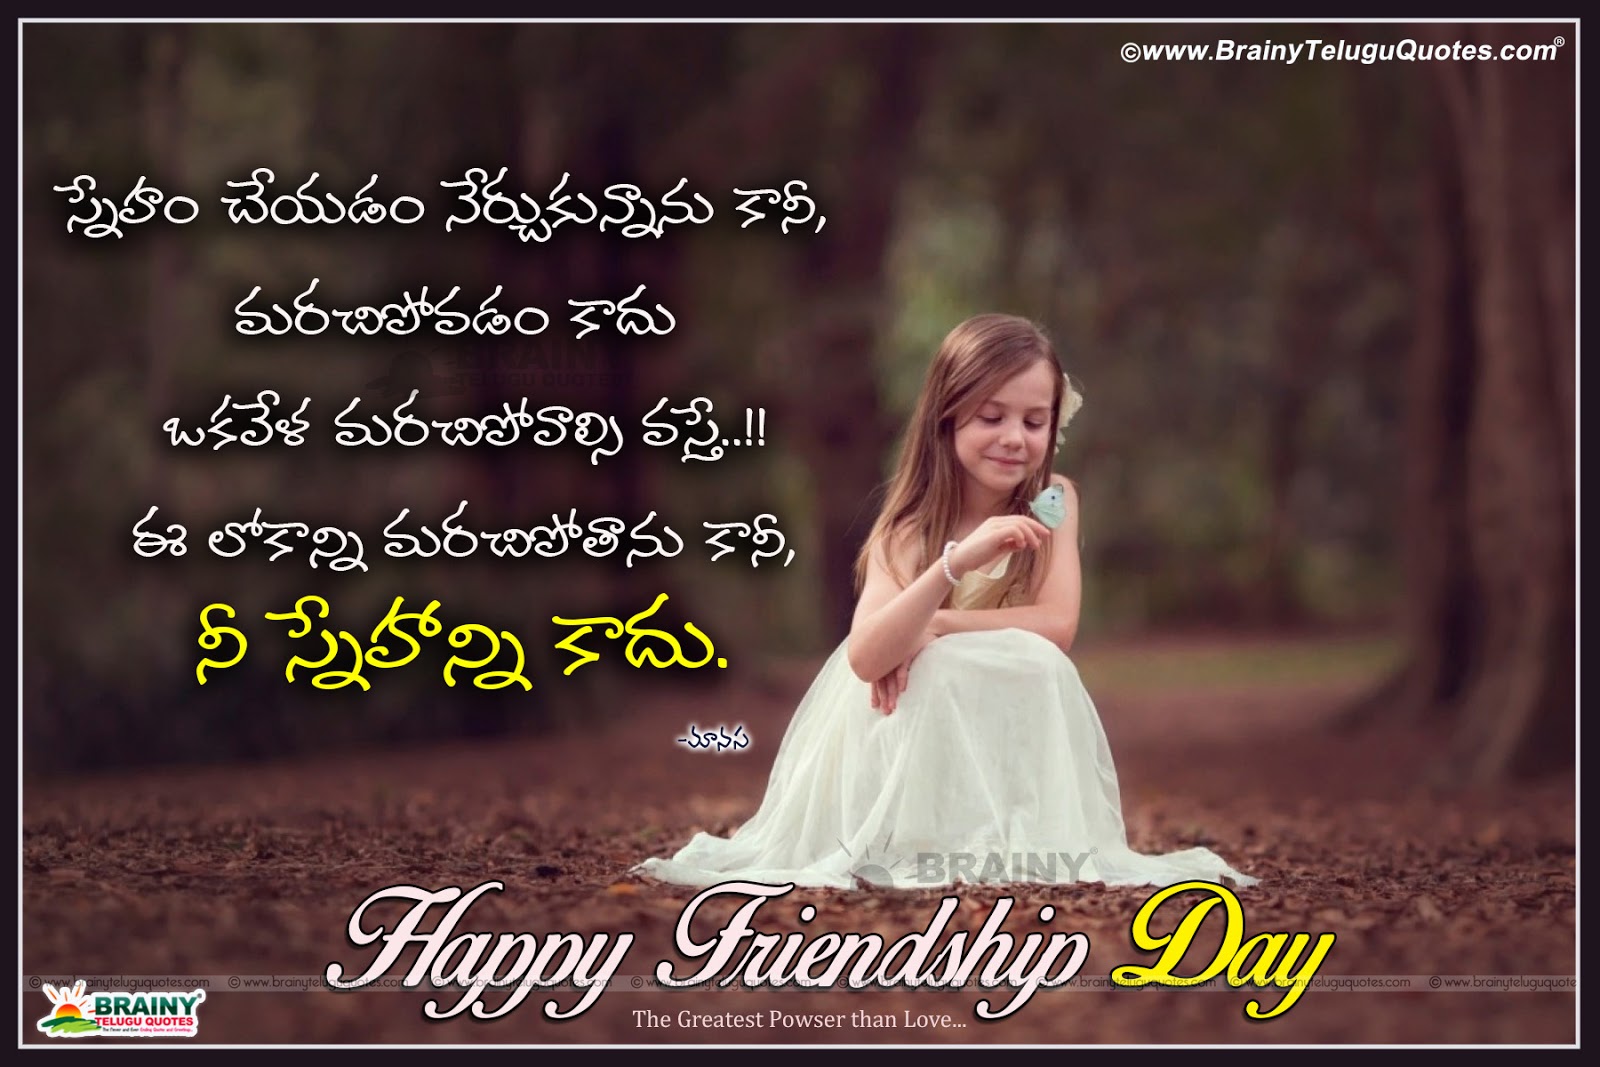 Friendship day Quotes in telugu with HD wallpapers ...